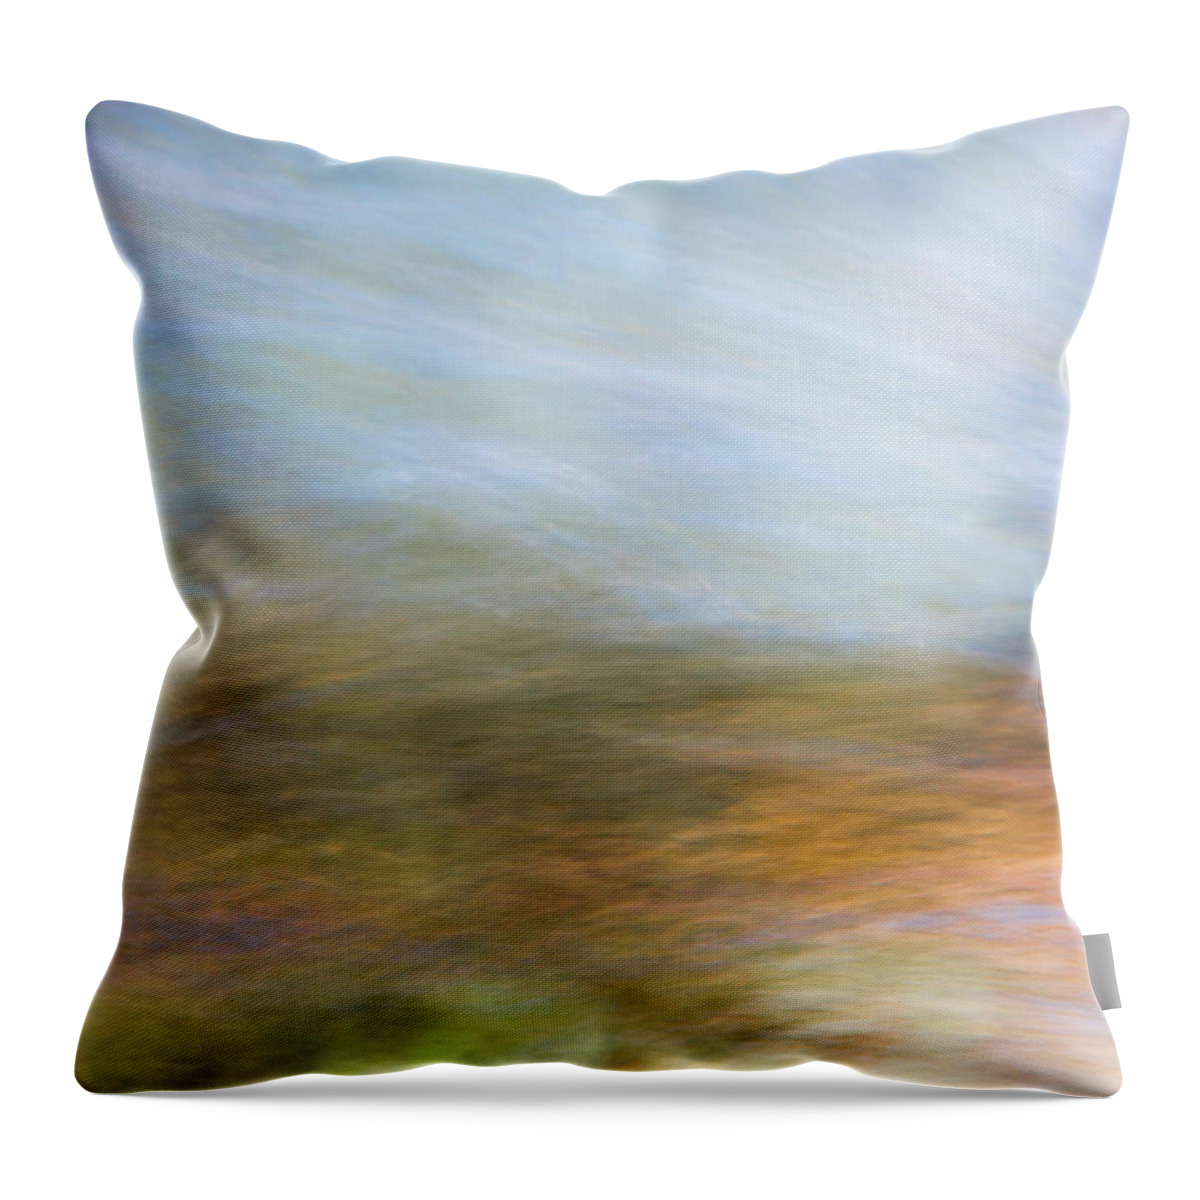 Yosemite Throw Pillow featuring the photograph Merced River Reflections 21 by Larry Marshall